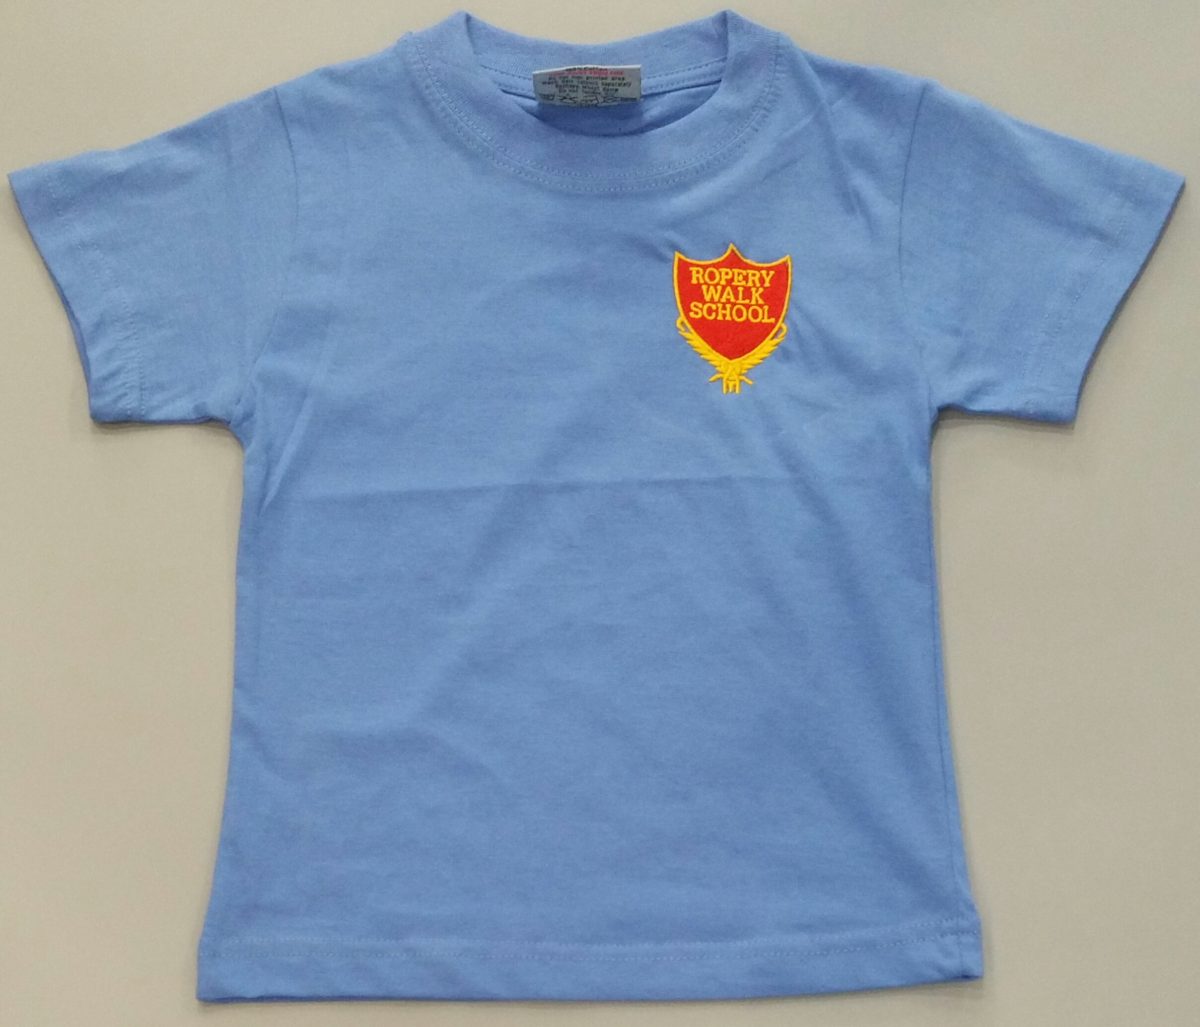 SKY BLUE P.E. T-SHIRT with embroidered school logo